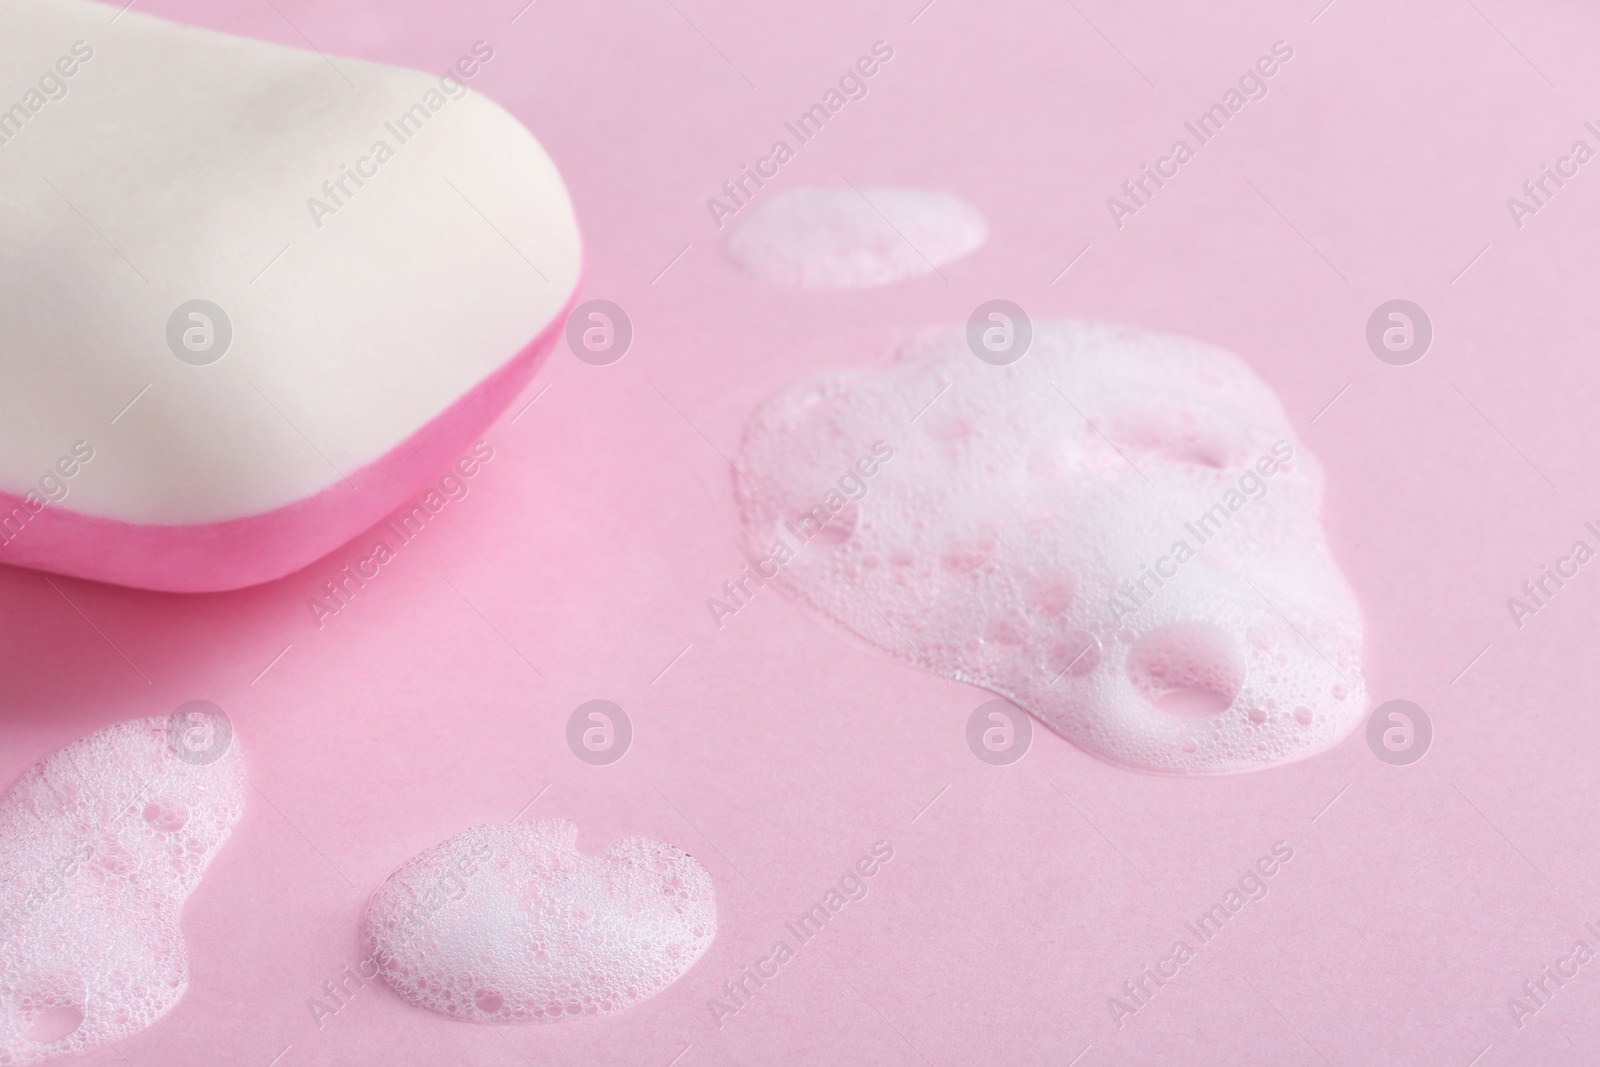 Photo of Soap bar and foam on color background, closeup view